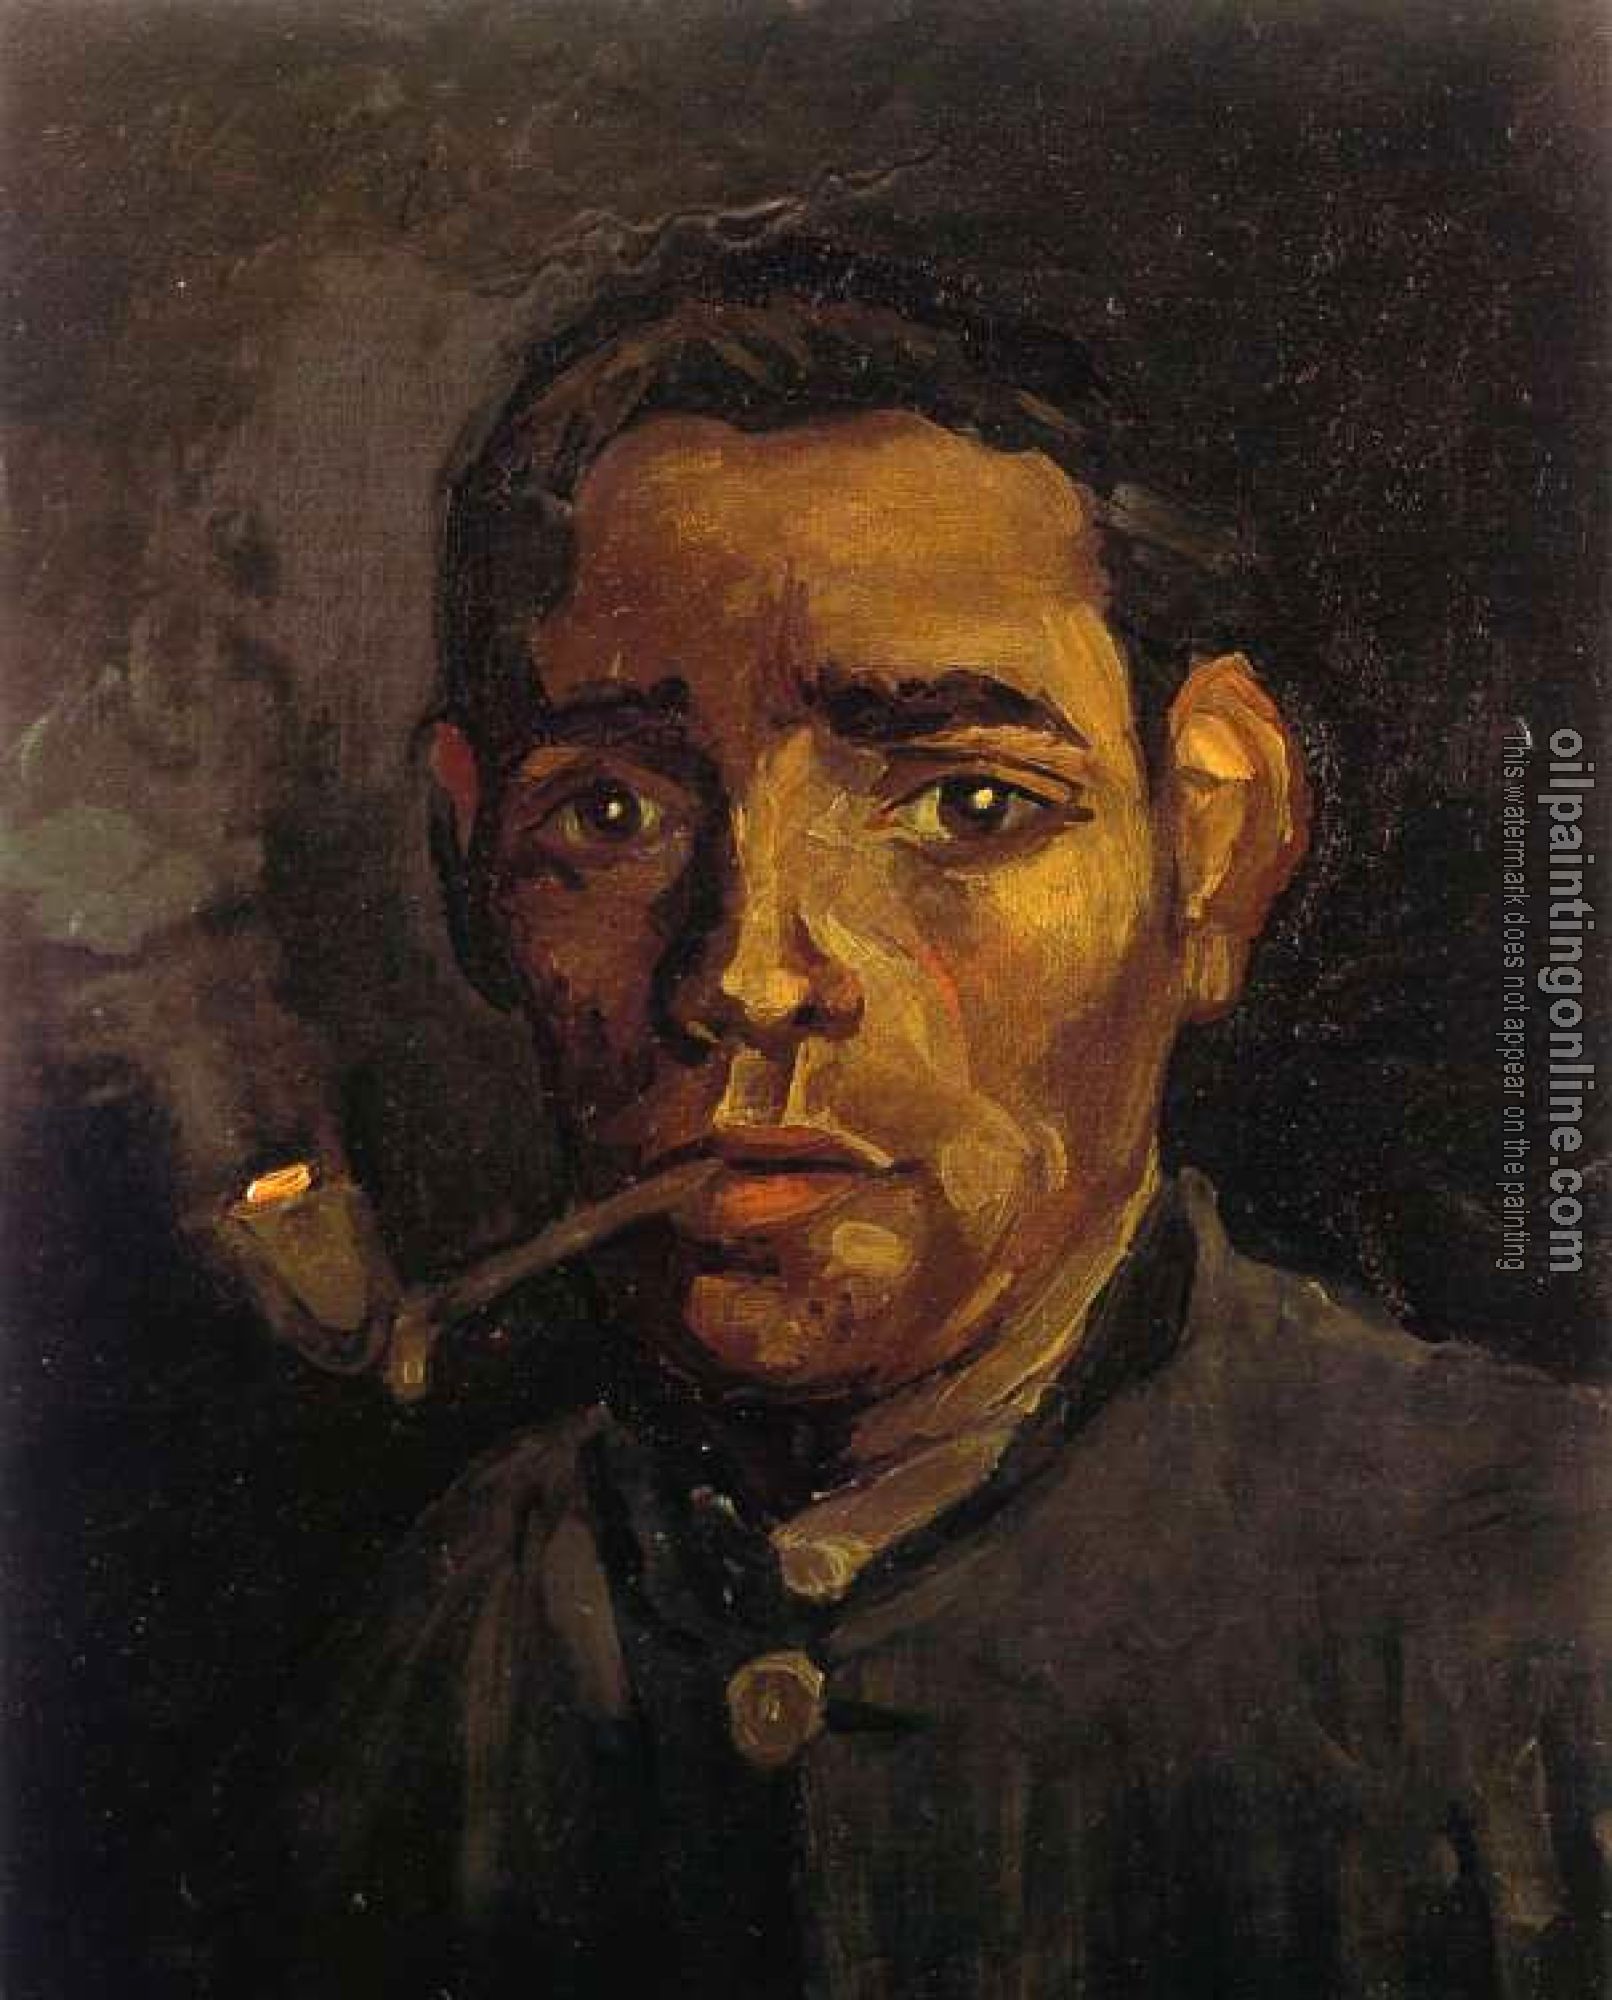 Gogh, Vincent van - Head of a Young Man,Bareheaded,with Pipe